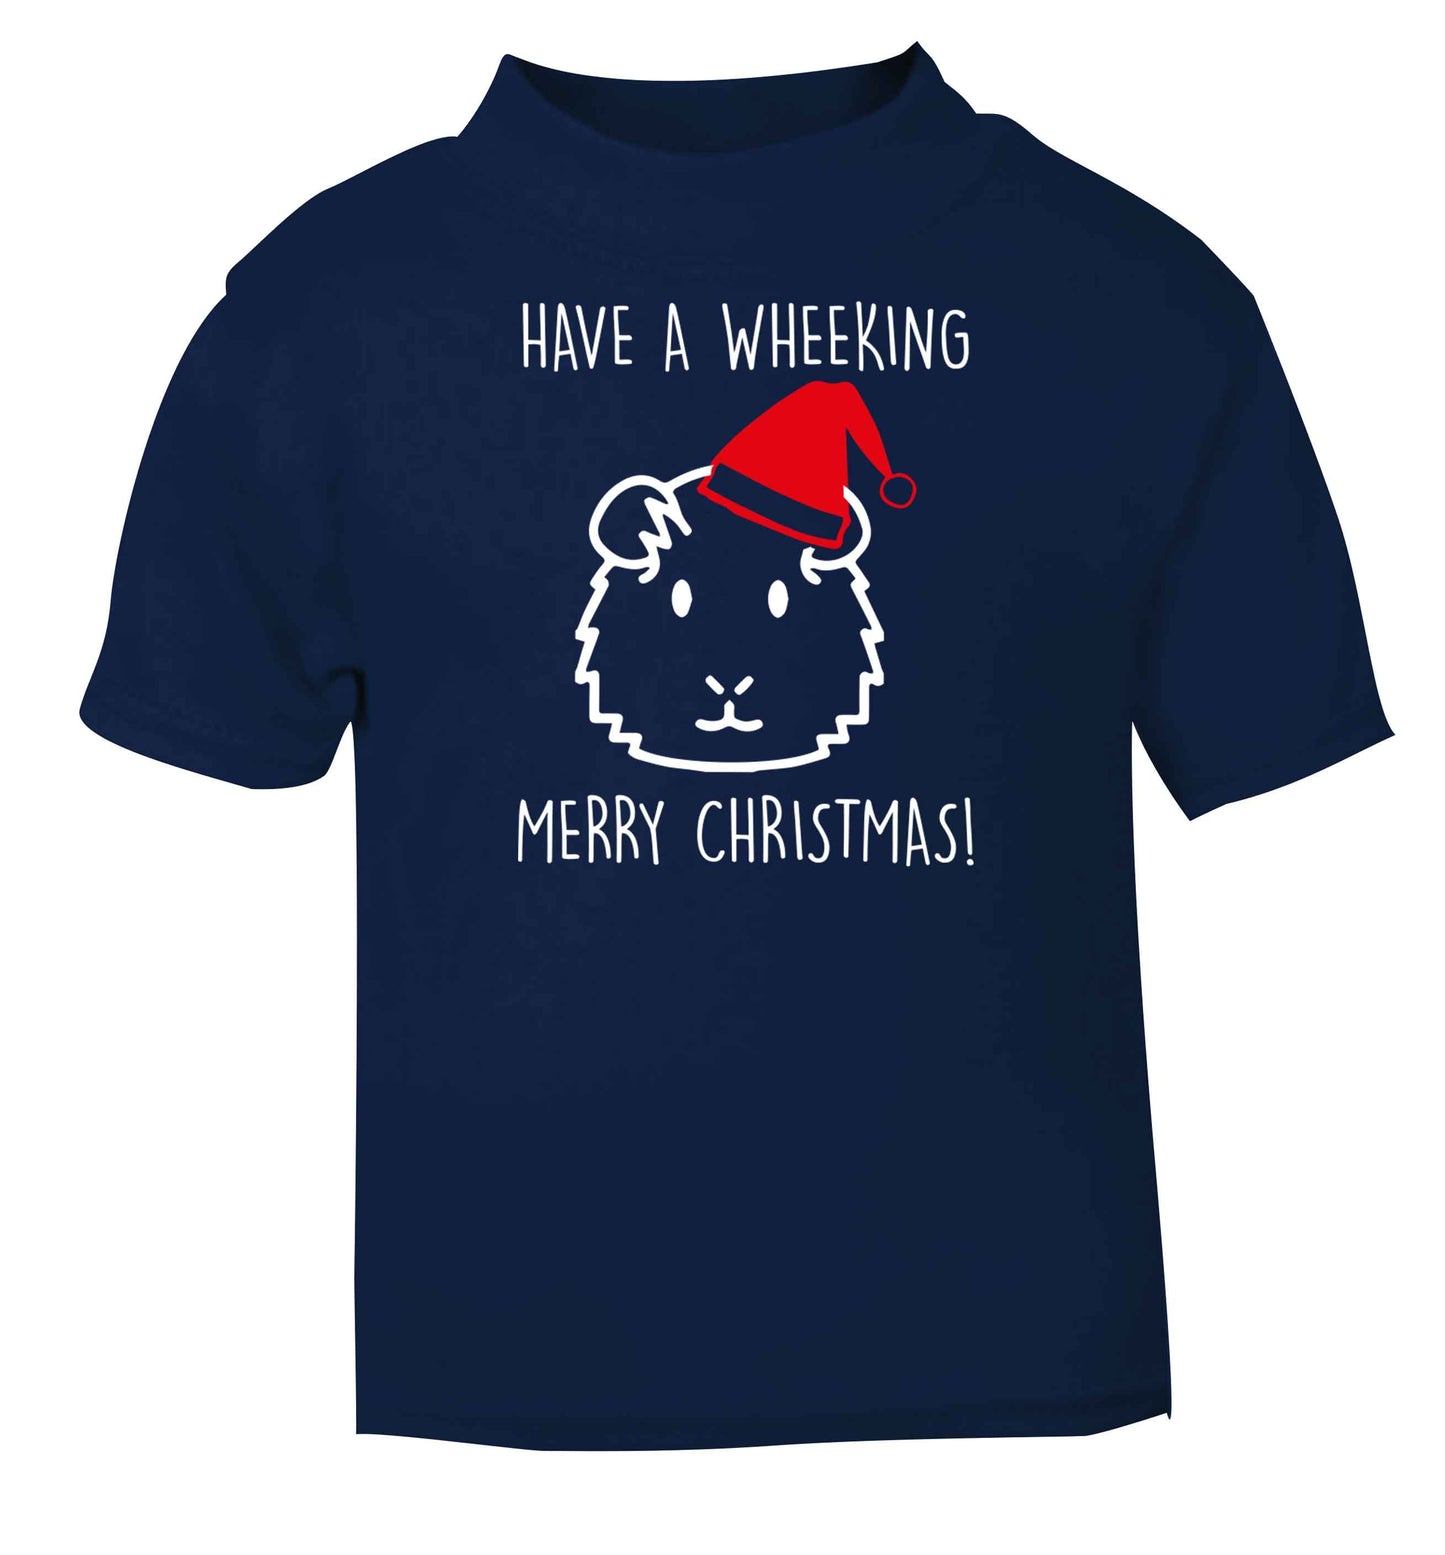 Have a wheeking merry Christmas navy baby toddler Tshirt 2 Years